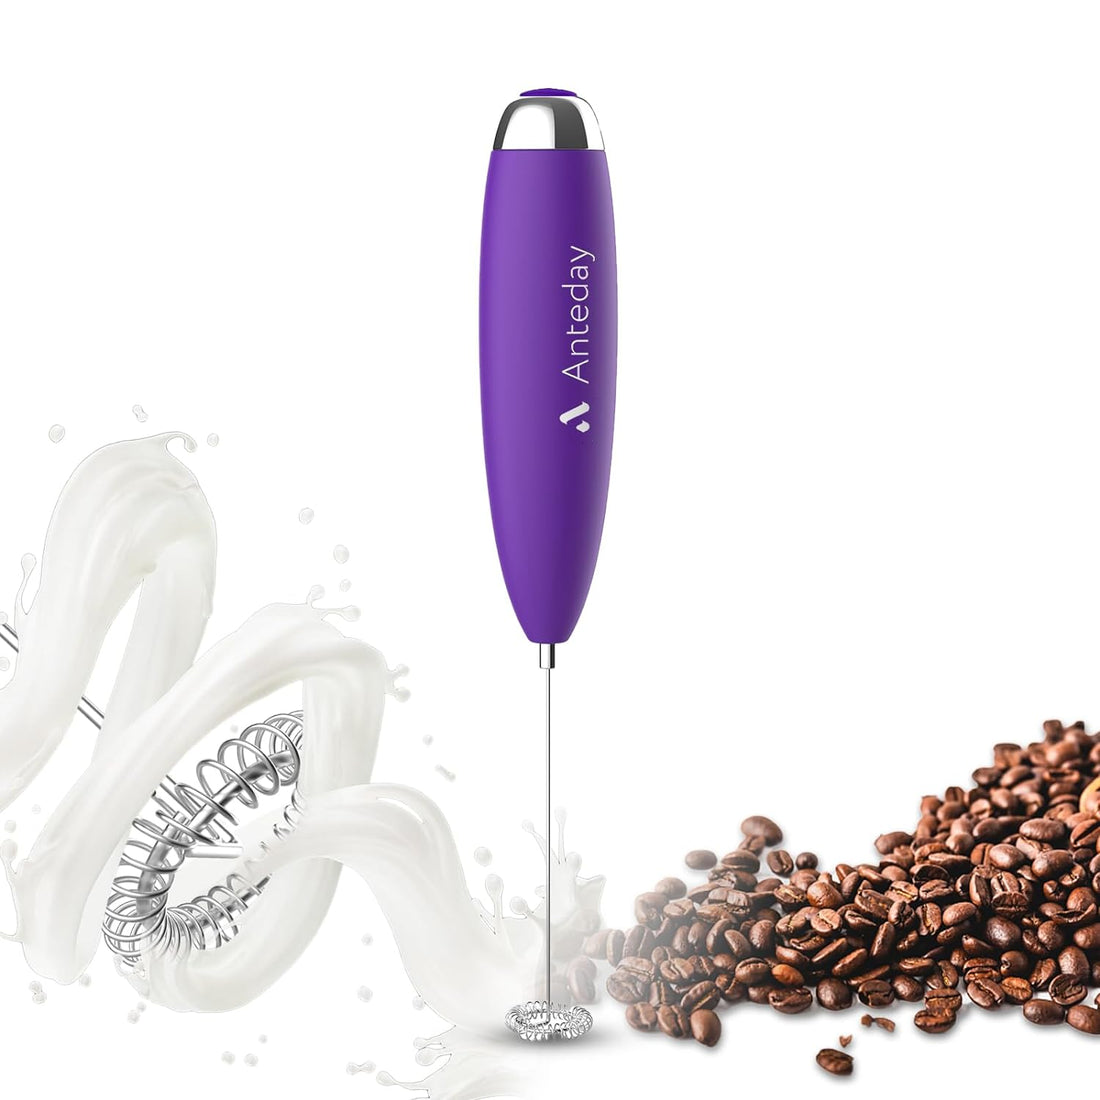 Frother for Coffee, Frother Handheld, Milk Frother, Upgraded Matcha Whisk Drink Mixer Electric Mini Whisk Hand Frother Mini Foamer Coffee Mixer for Cappuccino Frappe Matcha Hot Chocolate, Violet